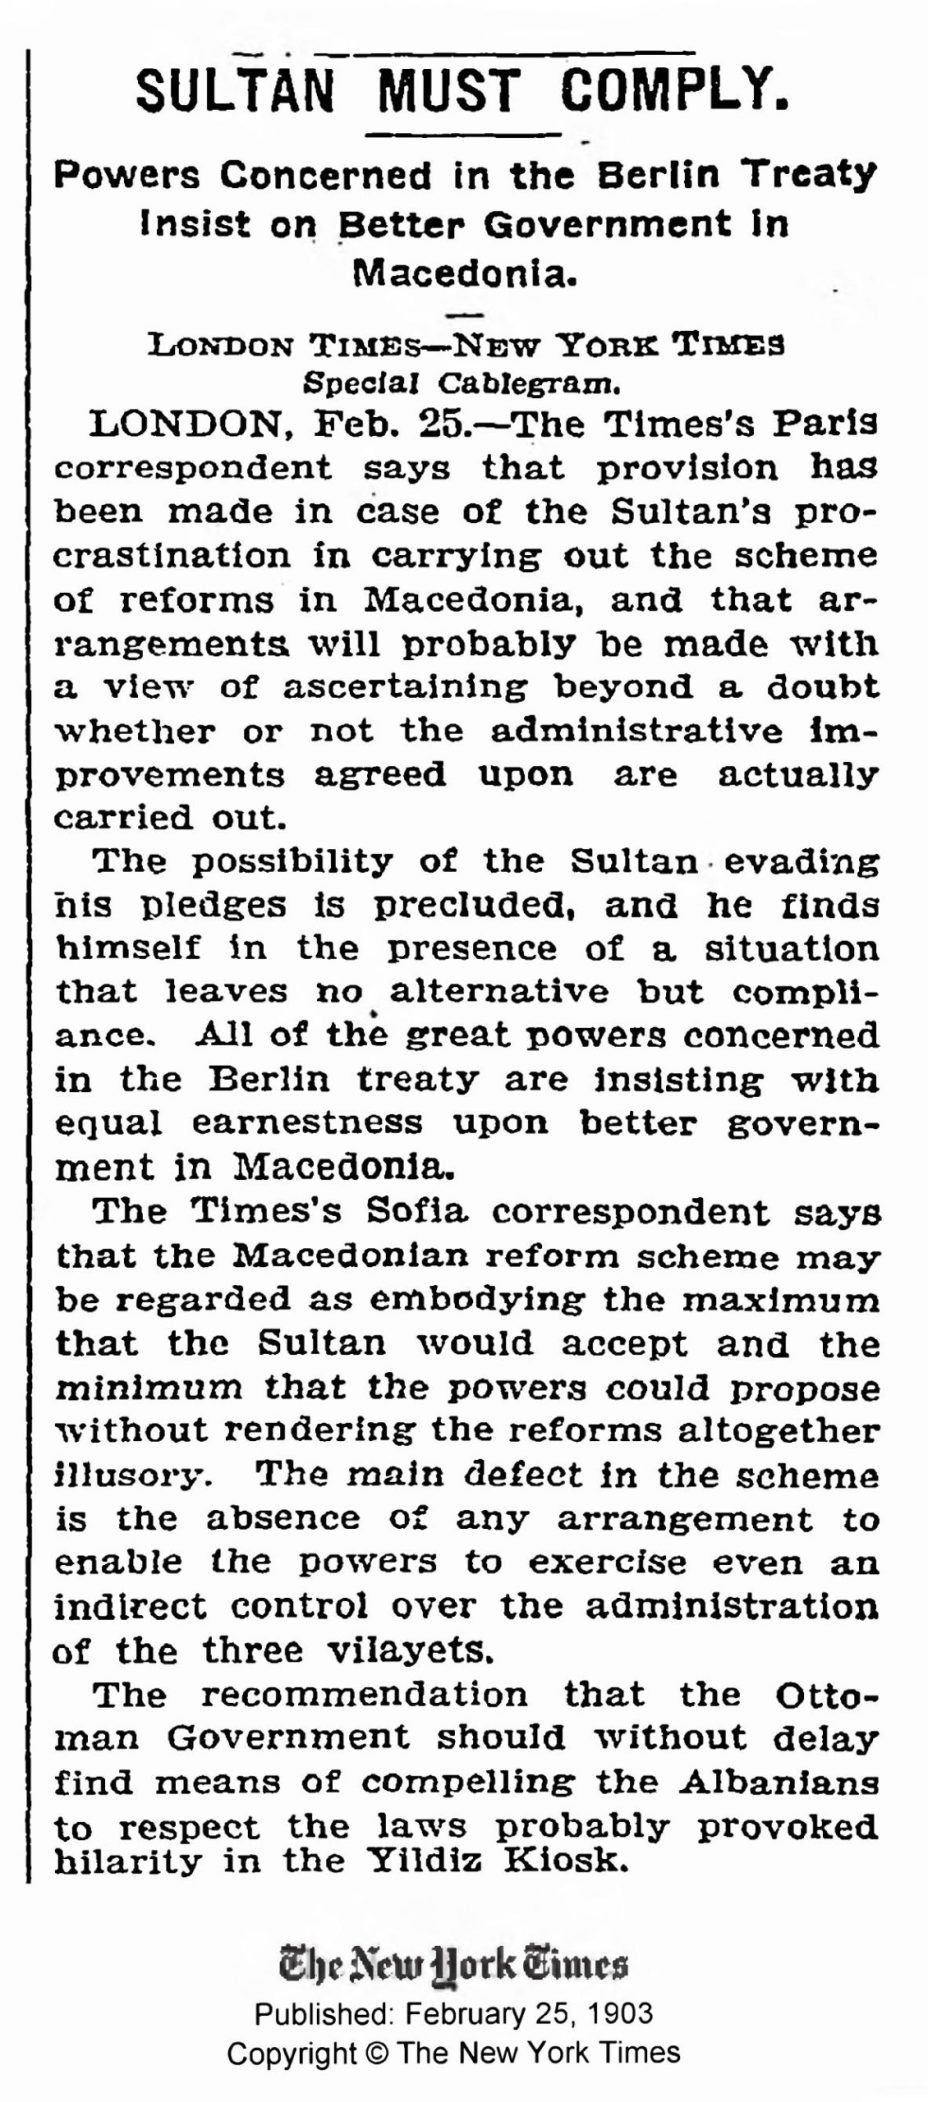 1903.02.25_The New York Times - Sultan must comply